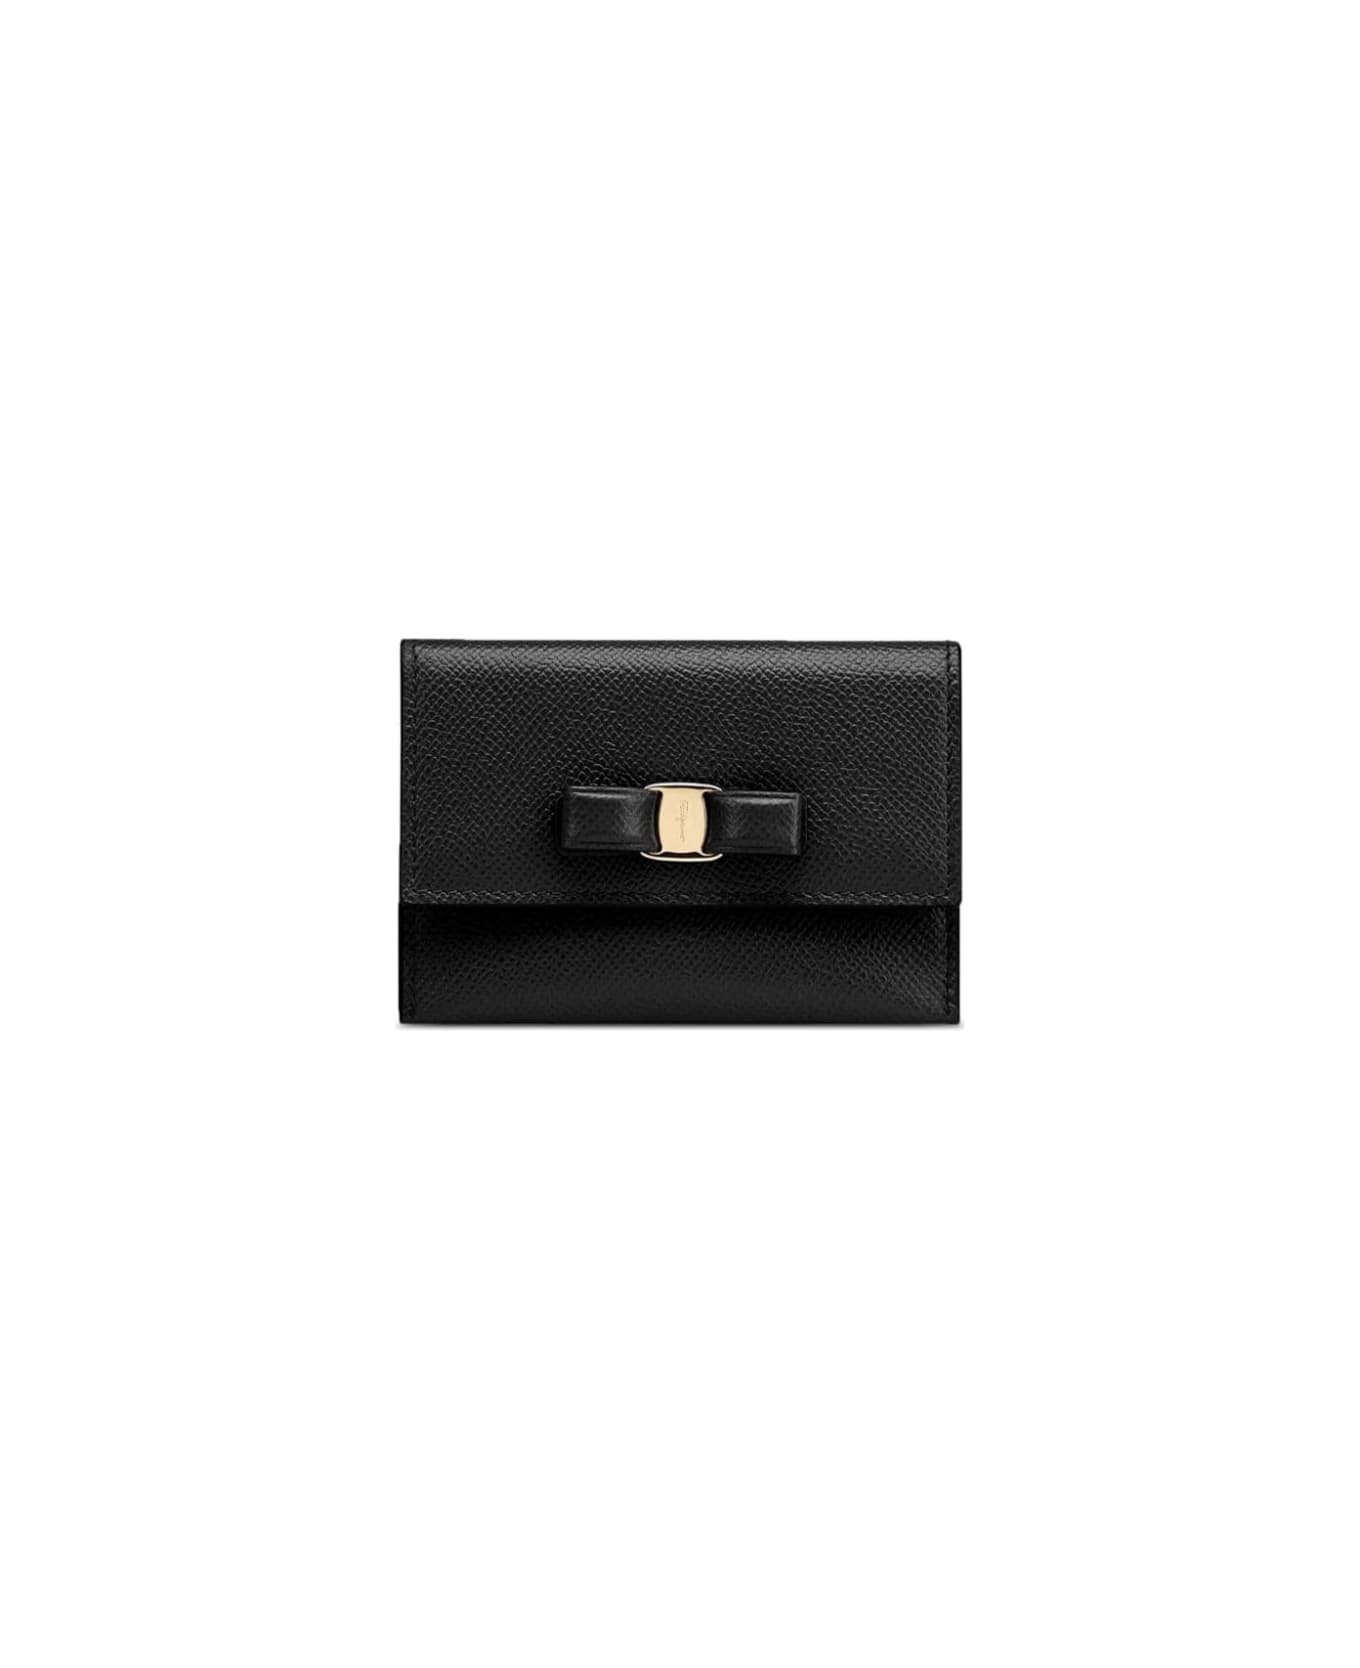 Ferragamo 'vara' Black Card-holder With Engraved Logo And Vara Bow In Hammered Leather Woman - Black